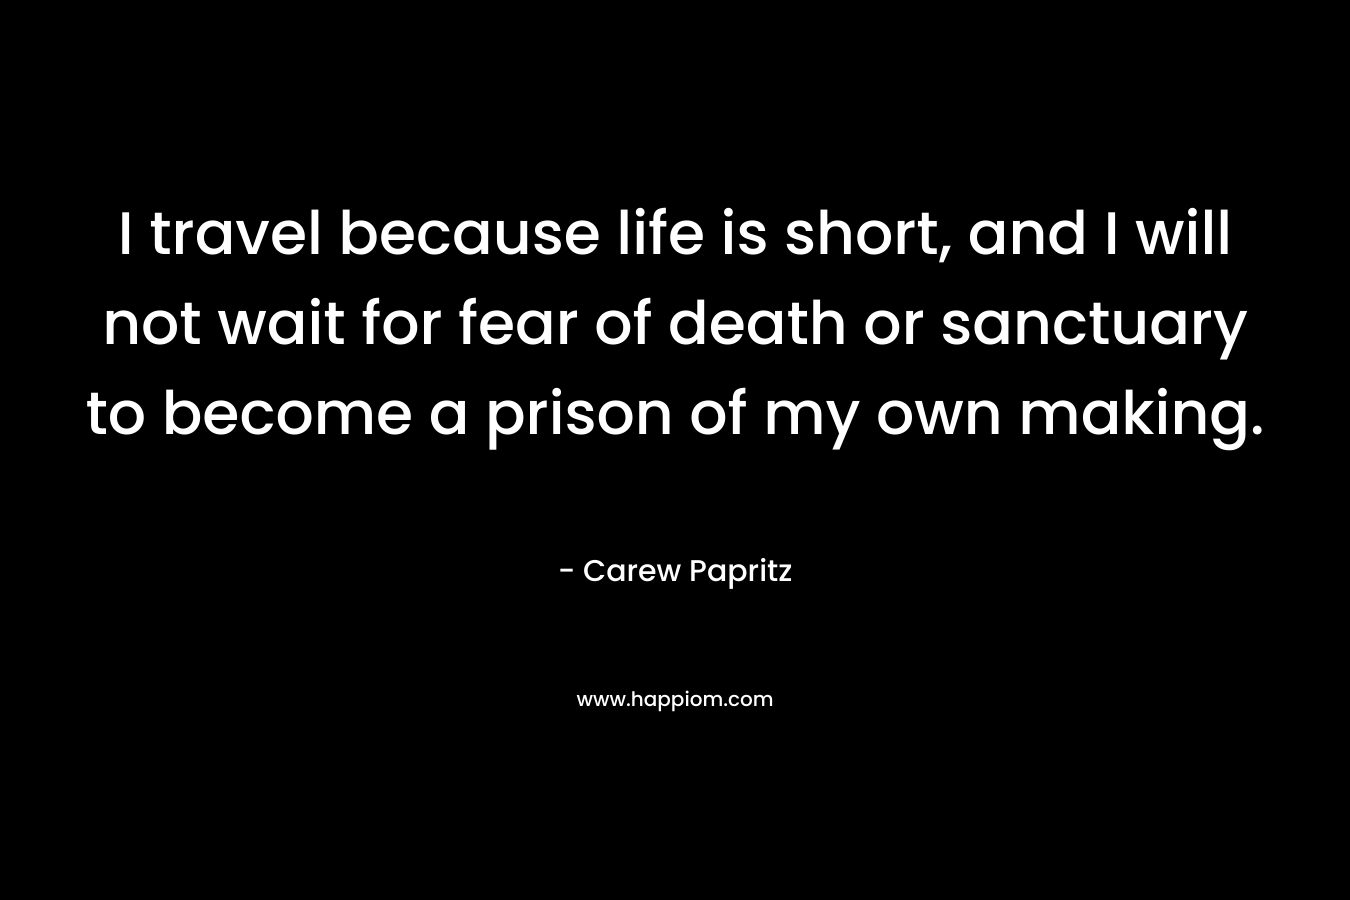 I travel because life is short, and I will not wait for fear of death or sanctuary to become a prison of my own making. – Carew Papritz